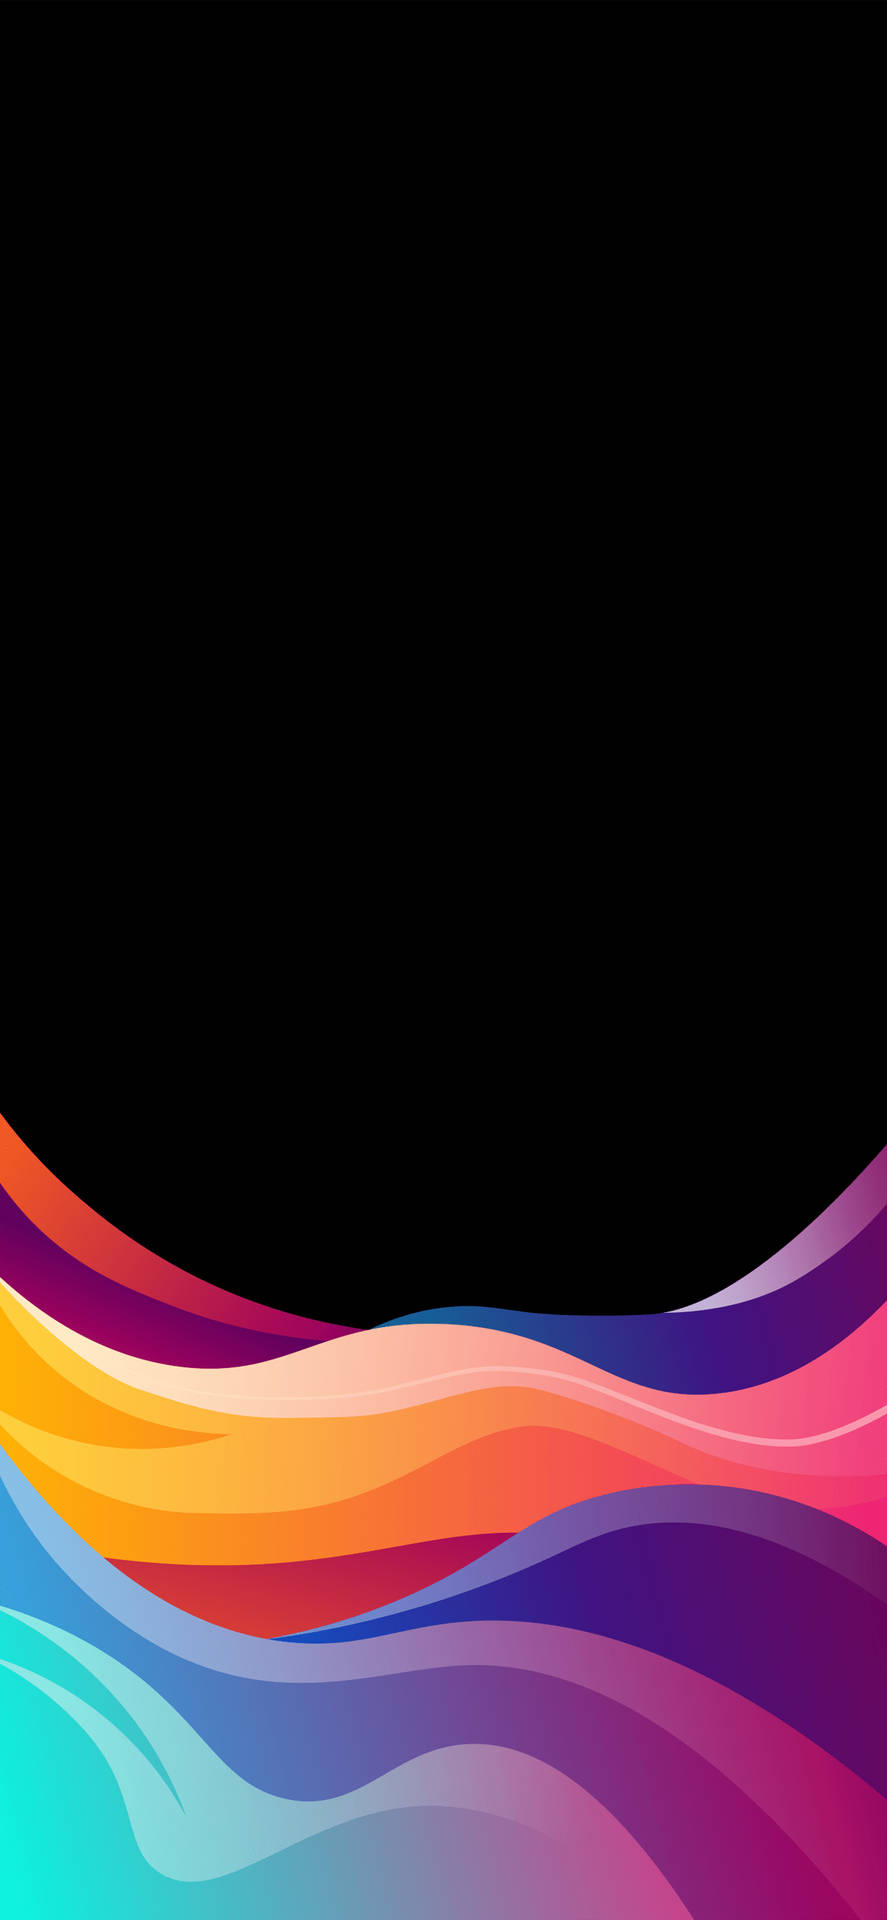 Iphone Xr Abstract Colorful Waves Background